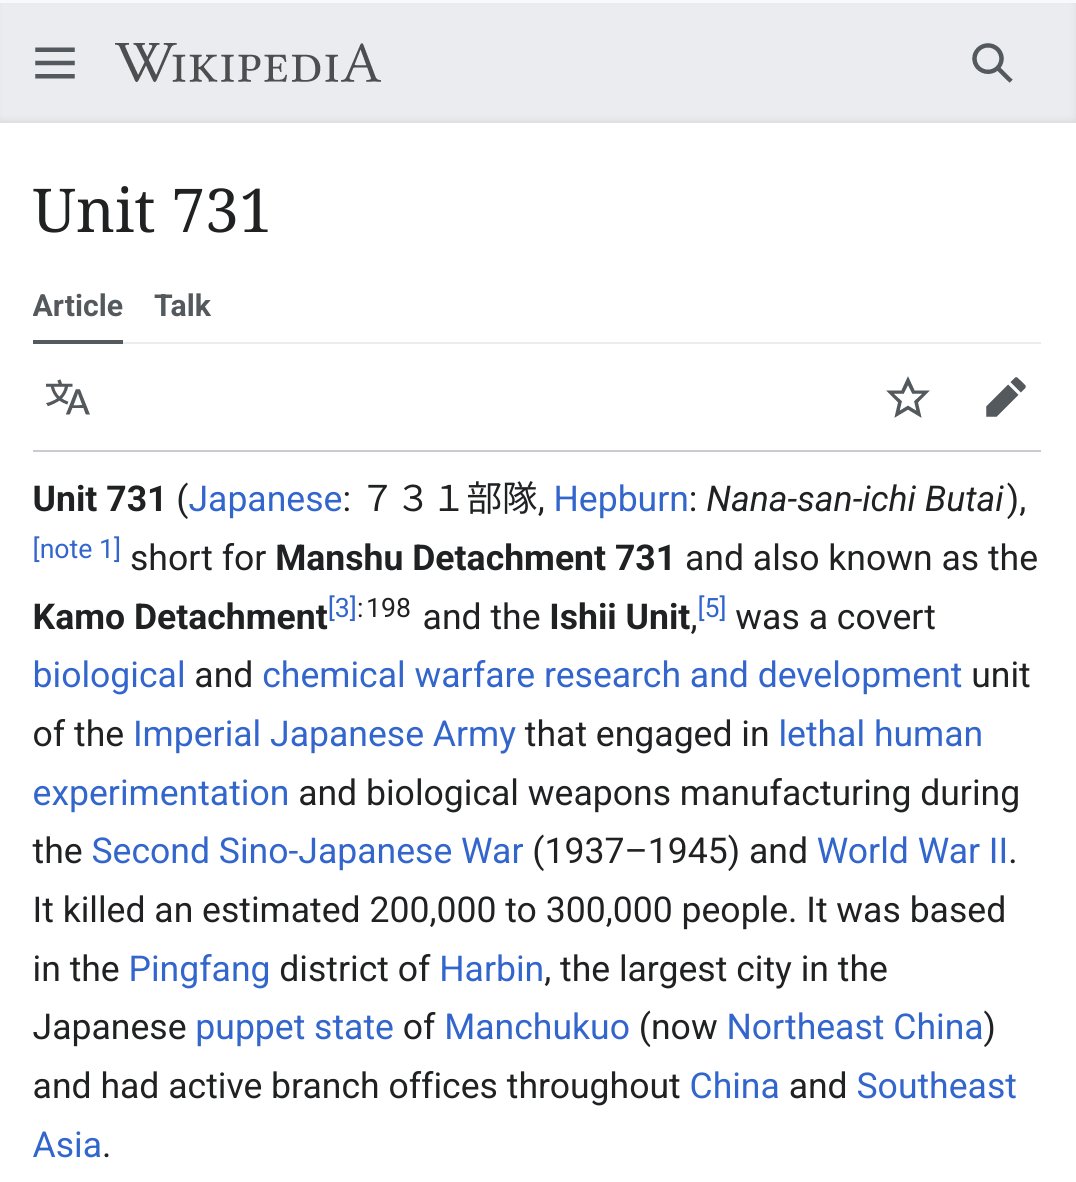 Shinzo Abe constantly dogwhistled to the lunatic fascists who think Japan was great during WW2 and it still wasn't enough for them, eventually getting assassinated one of those lunatics. Rest in piss buddy you chose this path